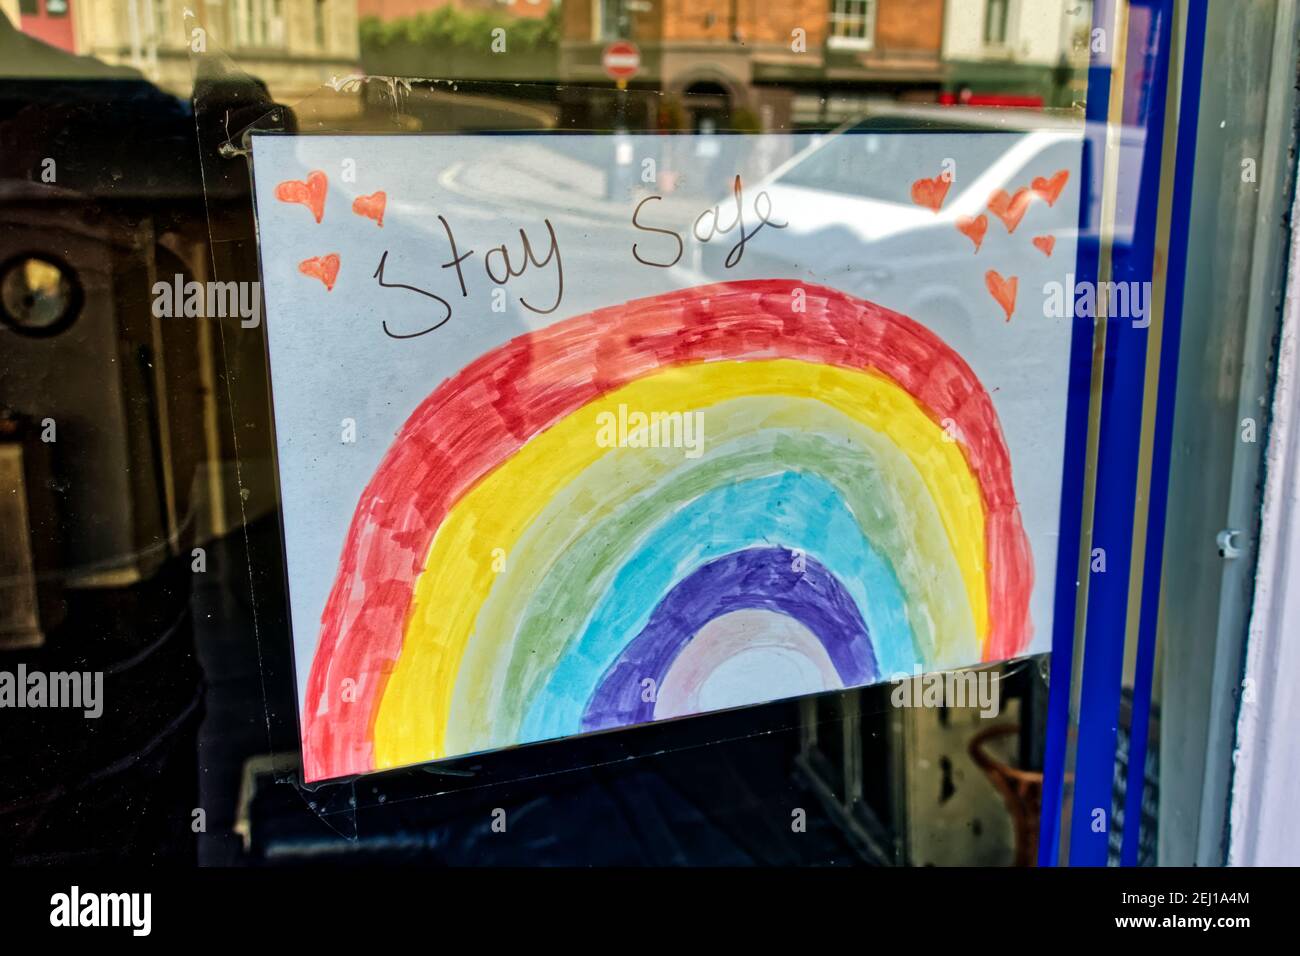 Warminster, Wiltshire / UK - April 23 2020: A Stay Safe from Coronavirus Rainbow of Hope picture displayed in a shop window Stock Photo